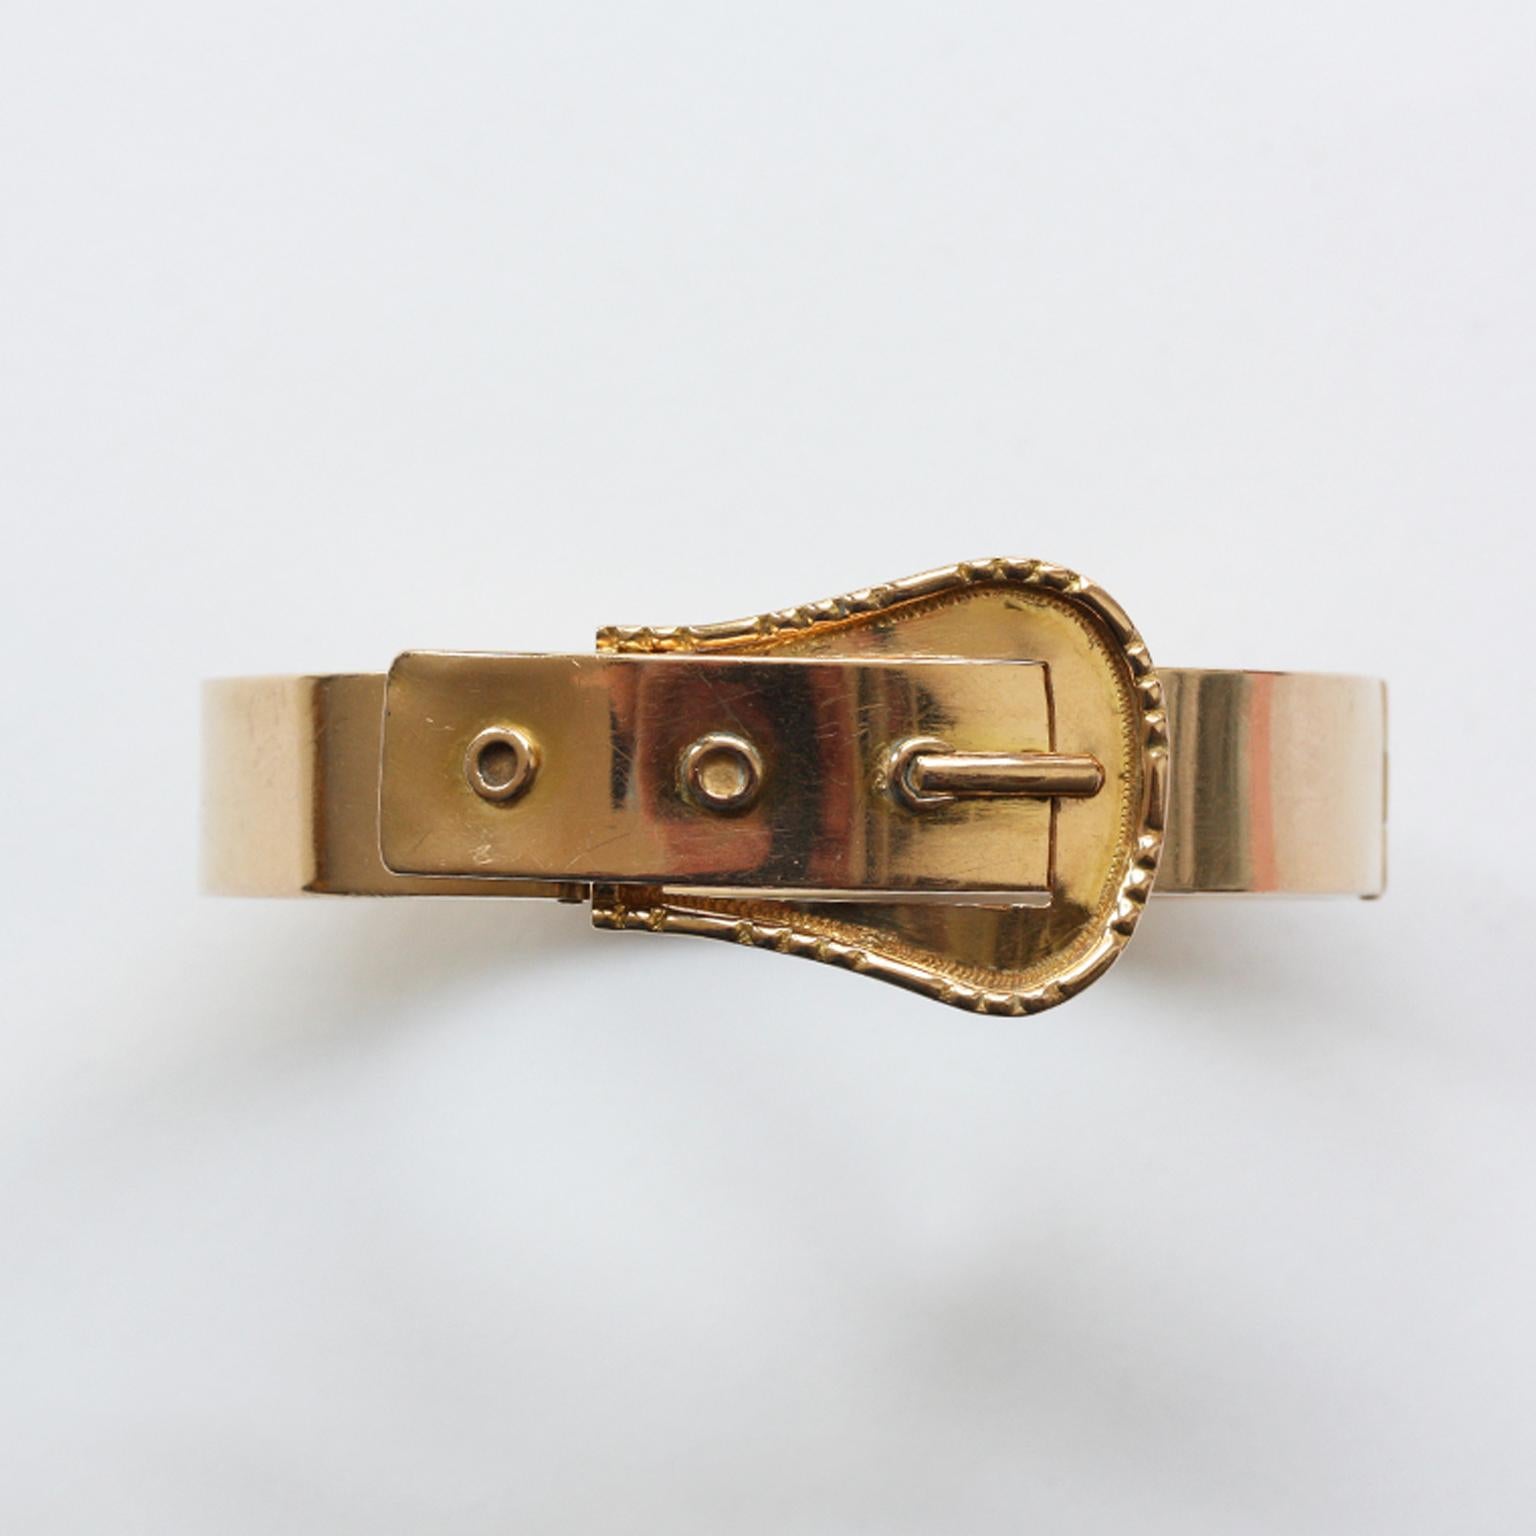 An 18 carat gold buckle bracelet, France, 19th century.

weight: 23.85 grams
inner size: 6 x 5 cm
circumference: 18 – 18.5 cm. fits a wrist of 17 – 18 cm